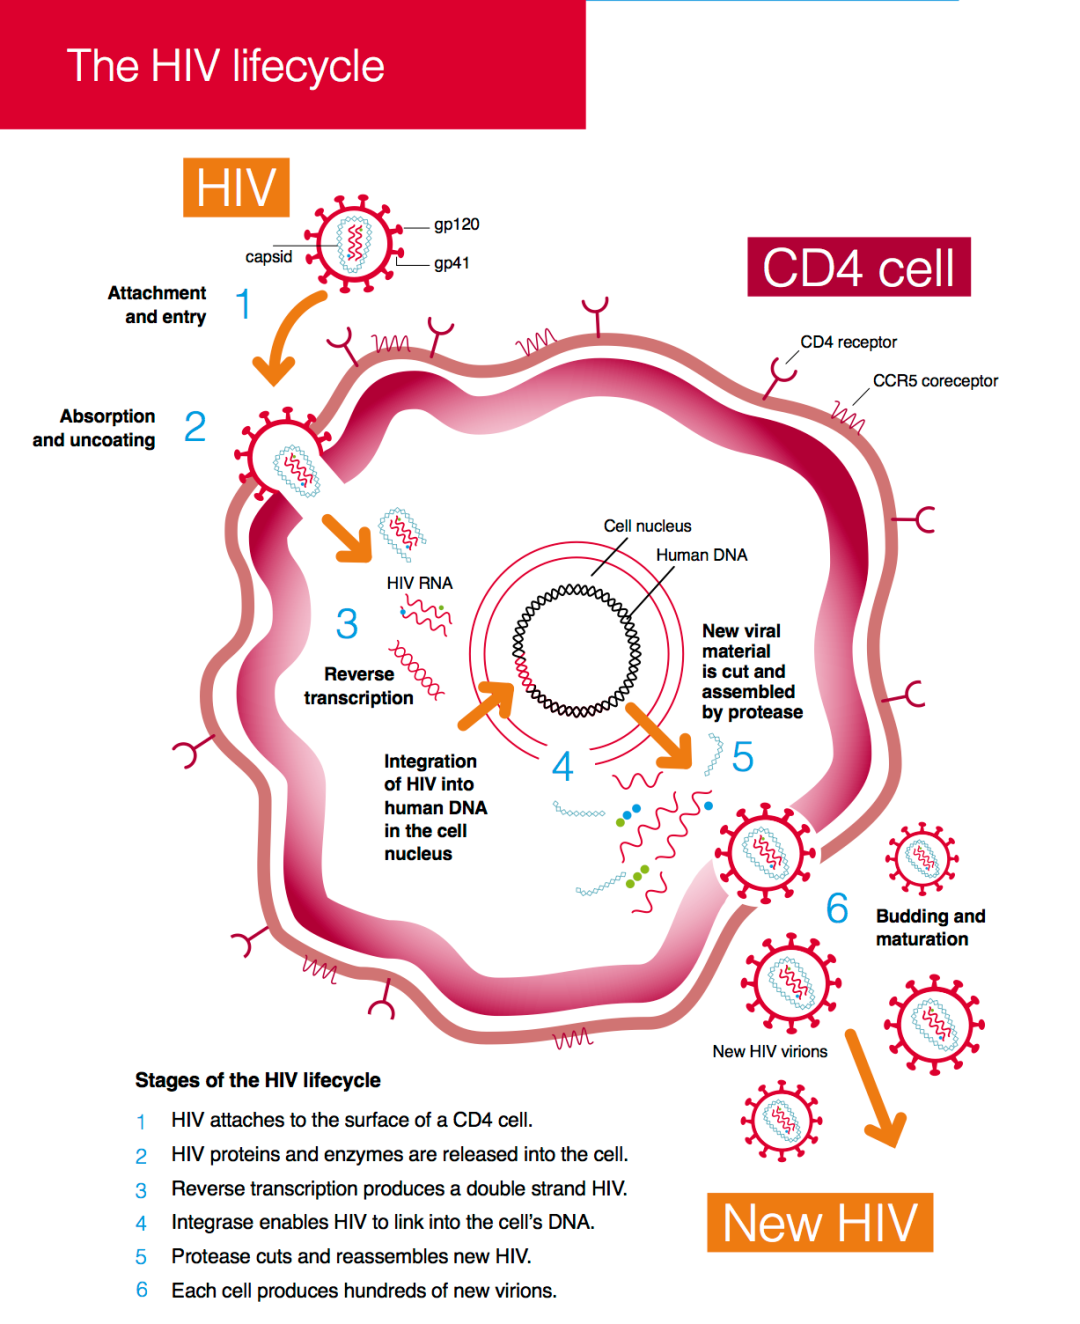 THE HIV LIFECYCLE